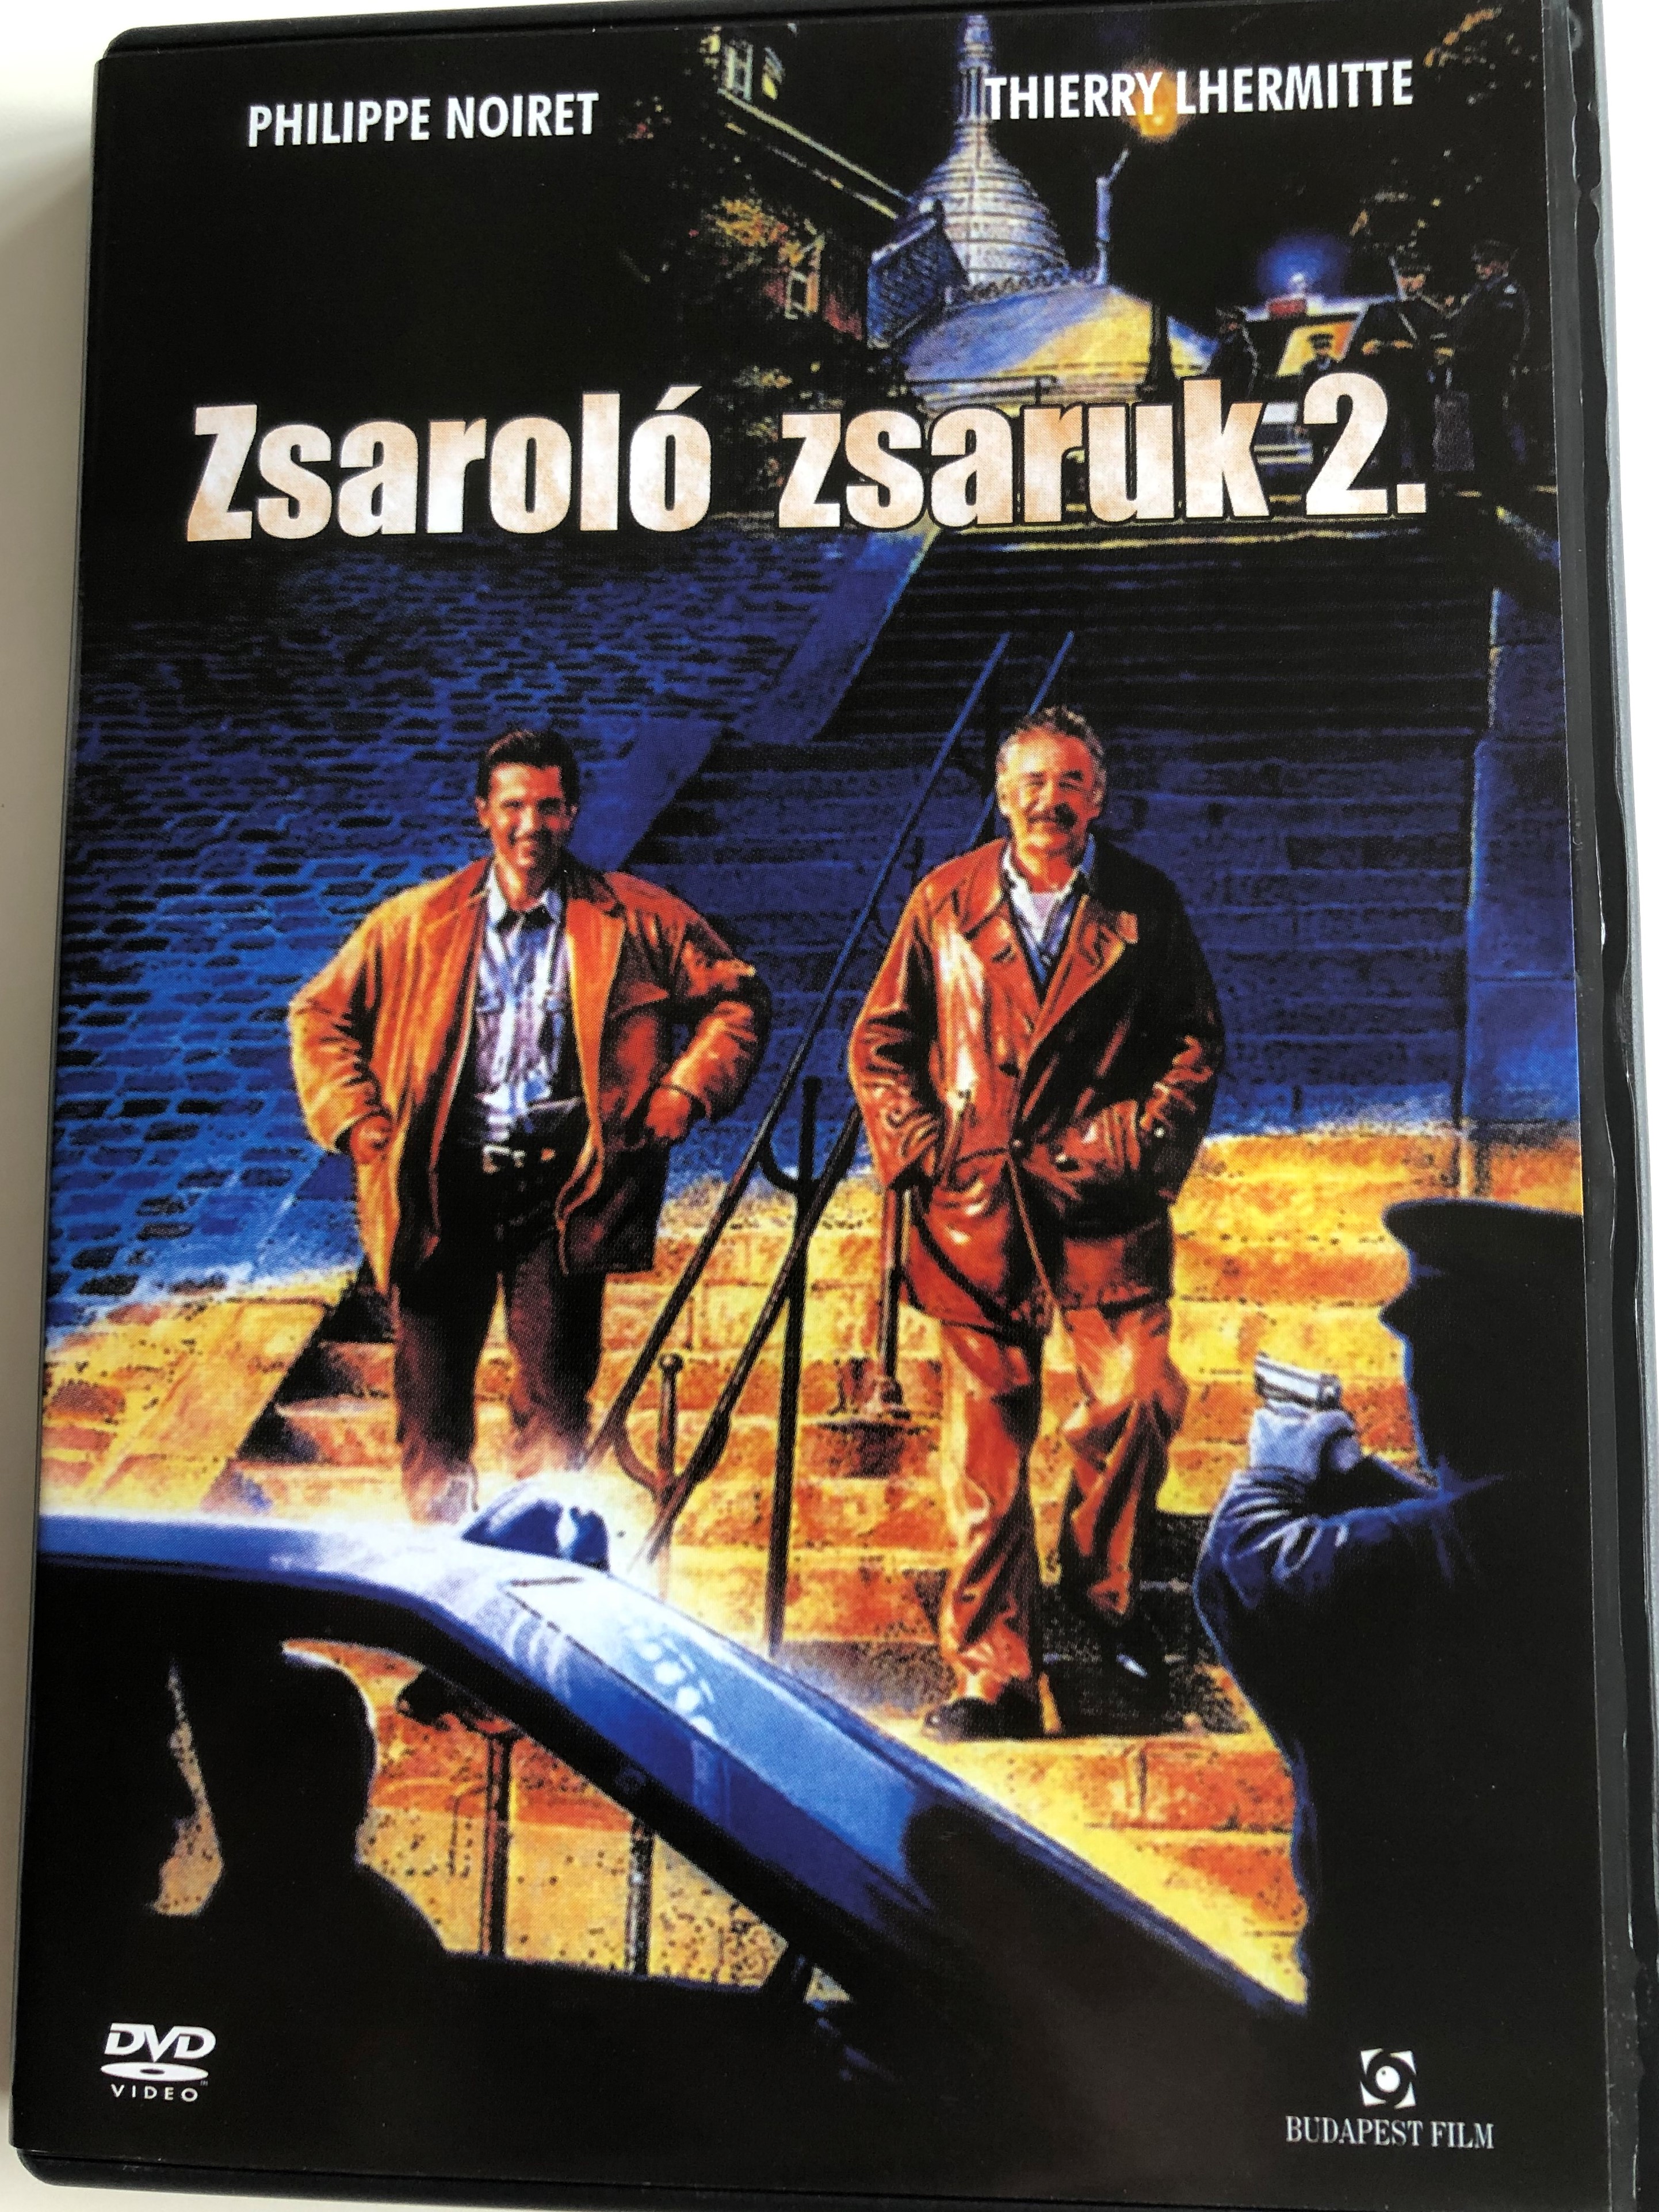 ripoux-contre-ripoux-dvd-zsarol-zsaruk-directed-by-claude-zidi-1.jpg